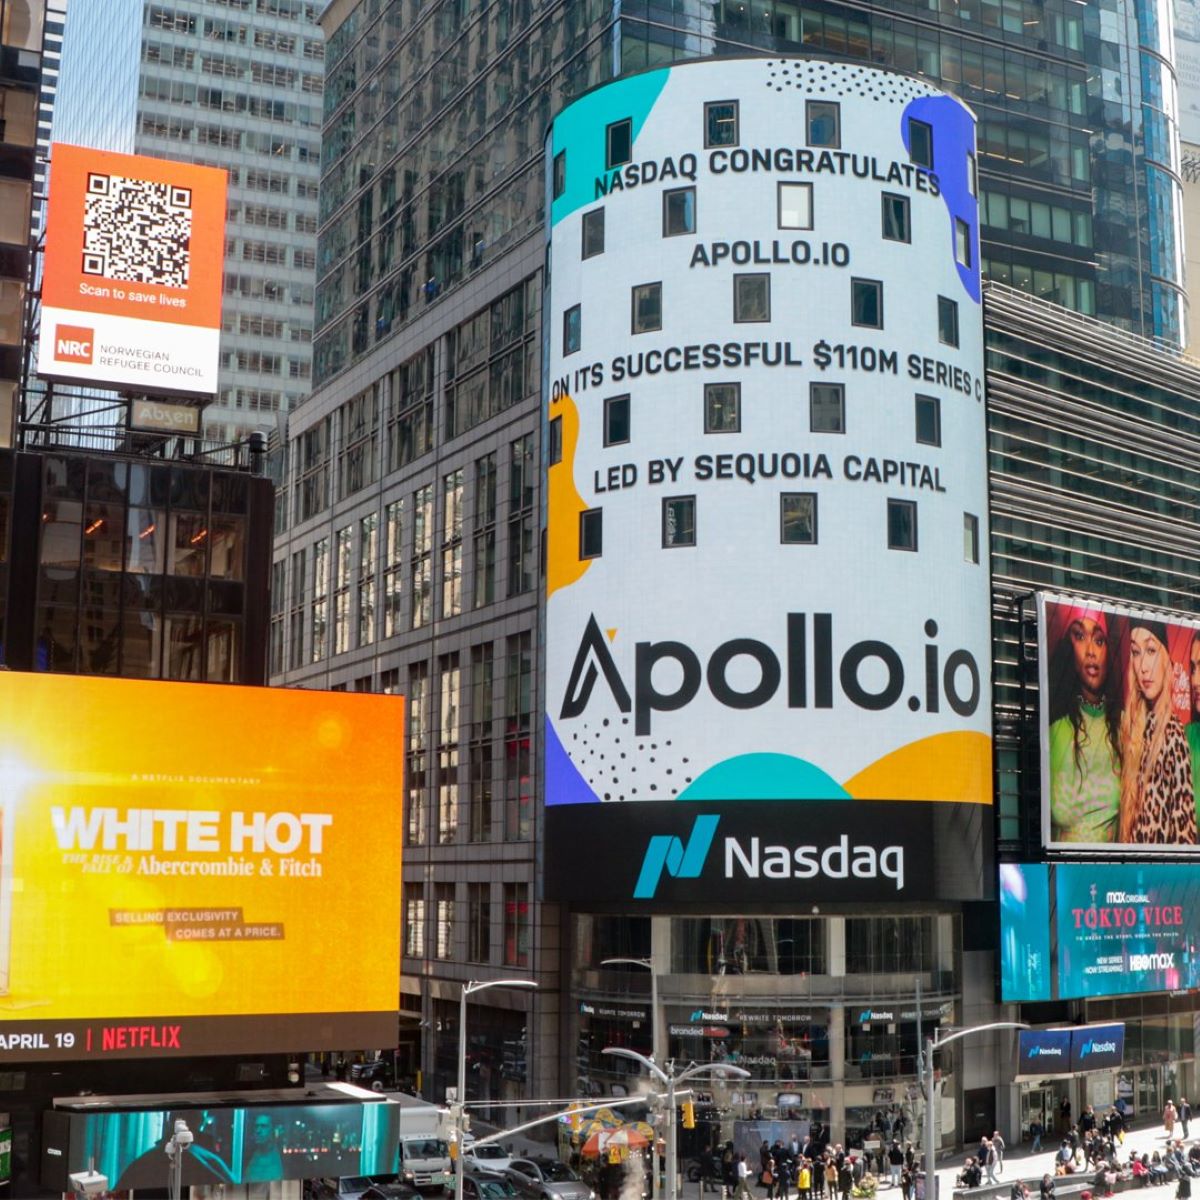 Apollo.io Secures $100M Funding At A Valuation Of $1.6B, Accelerating The Growth Of Its Sales Tech Platform